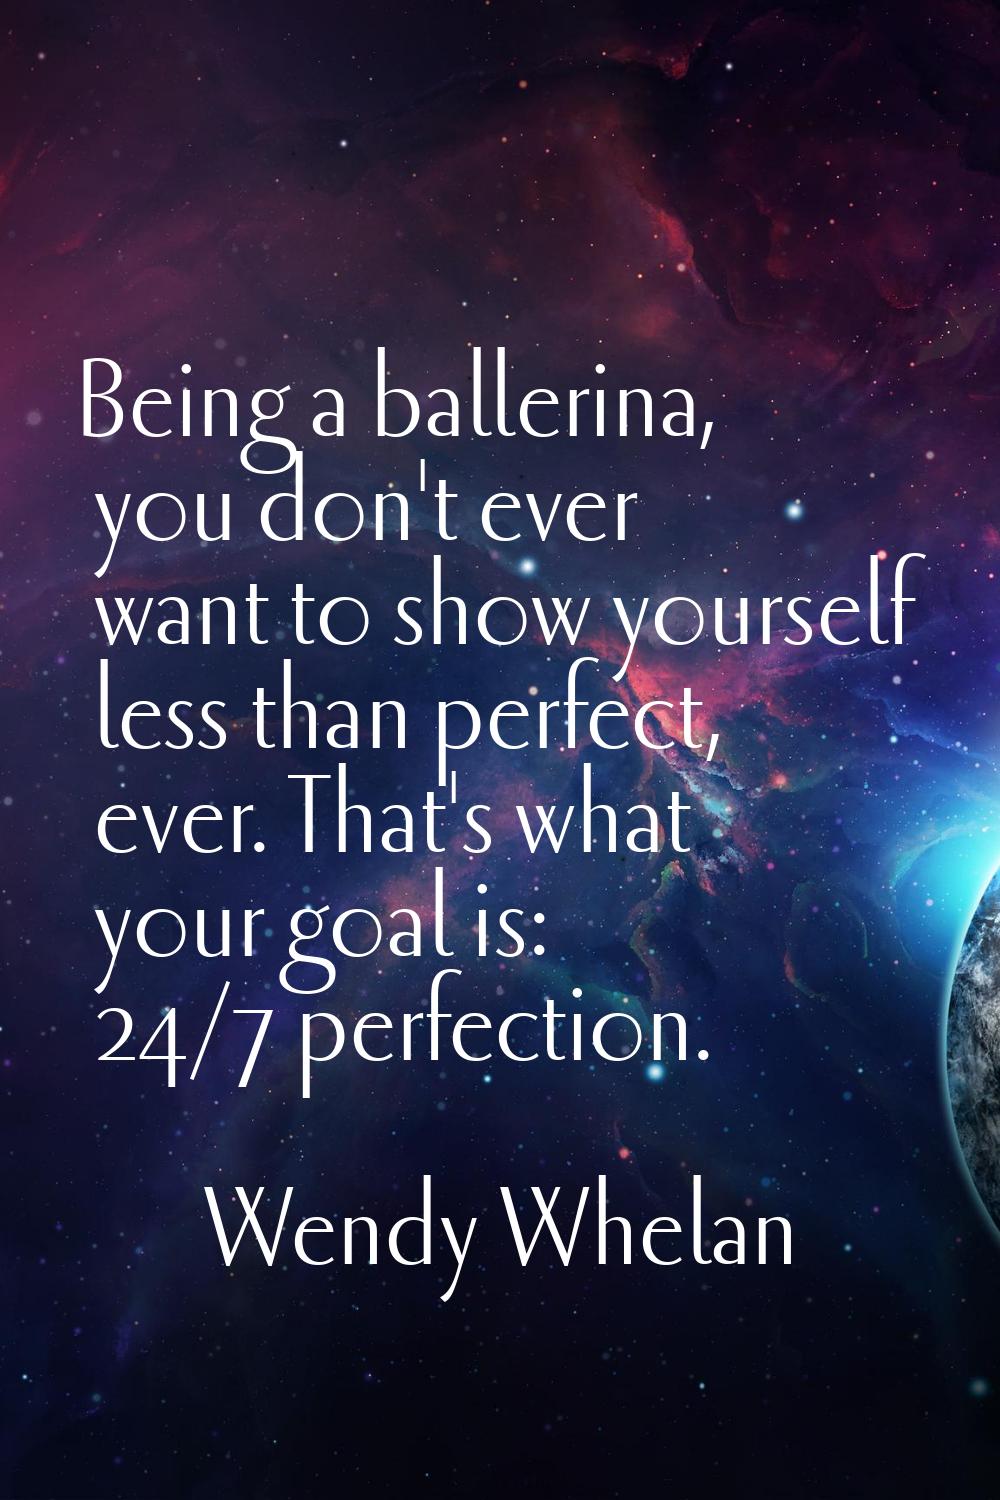 Being a ballerina, you don't ever want to show yourself less than perfect, ever. That's what your g